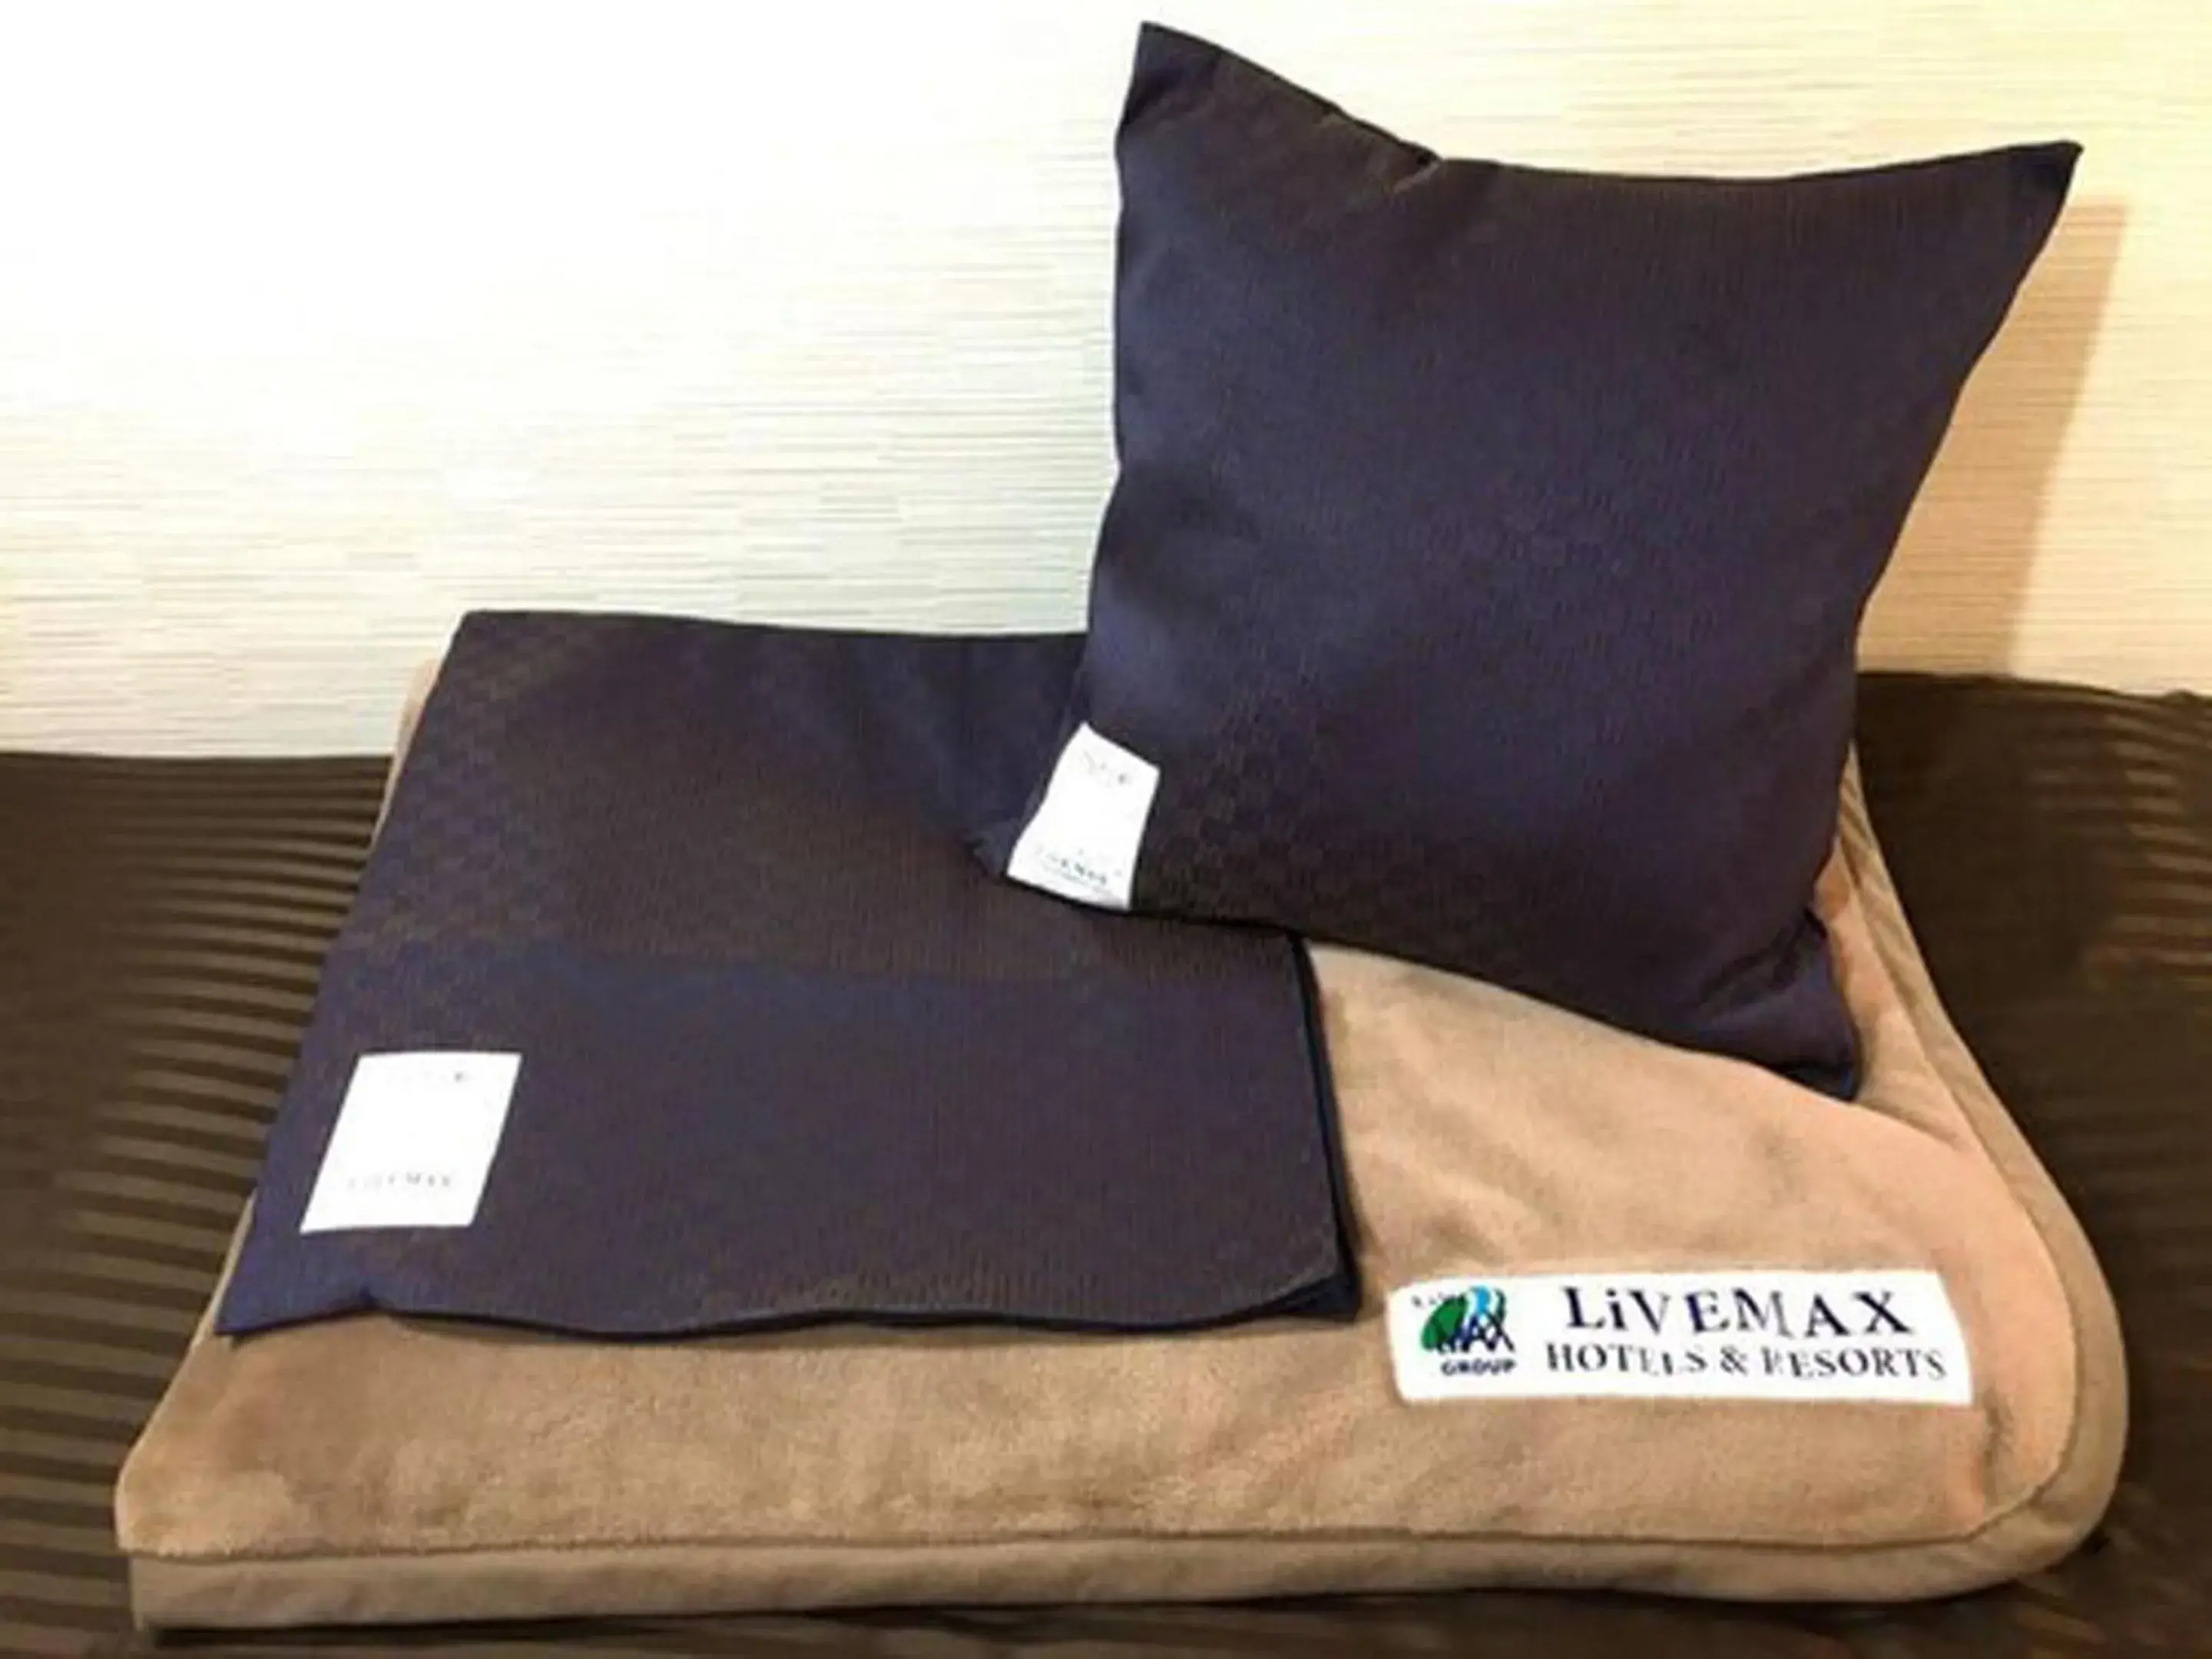 Area and facilities, Bed in HOTEL LiVEMAX BUDGET Korakuen